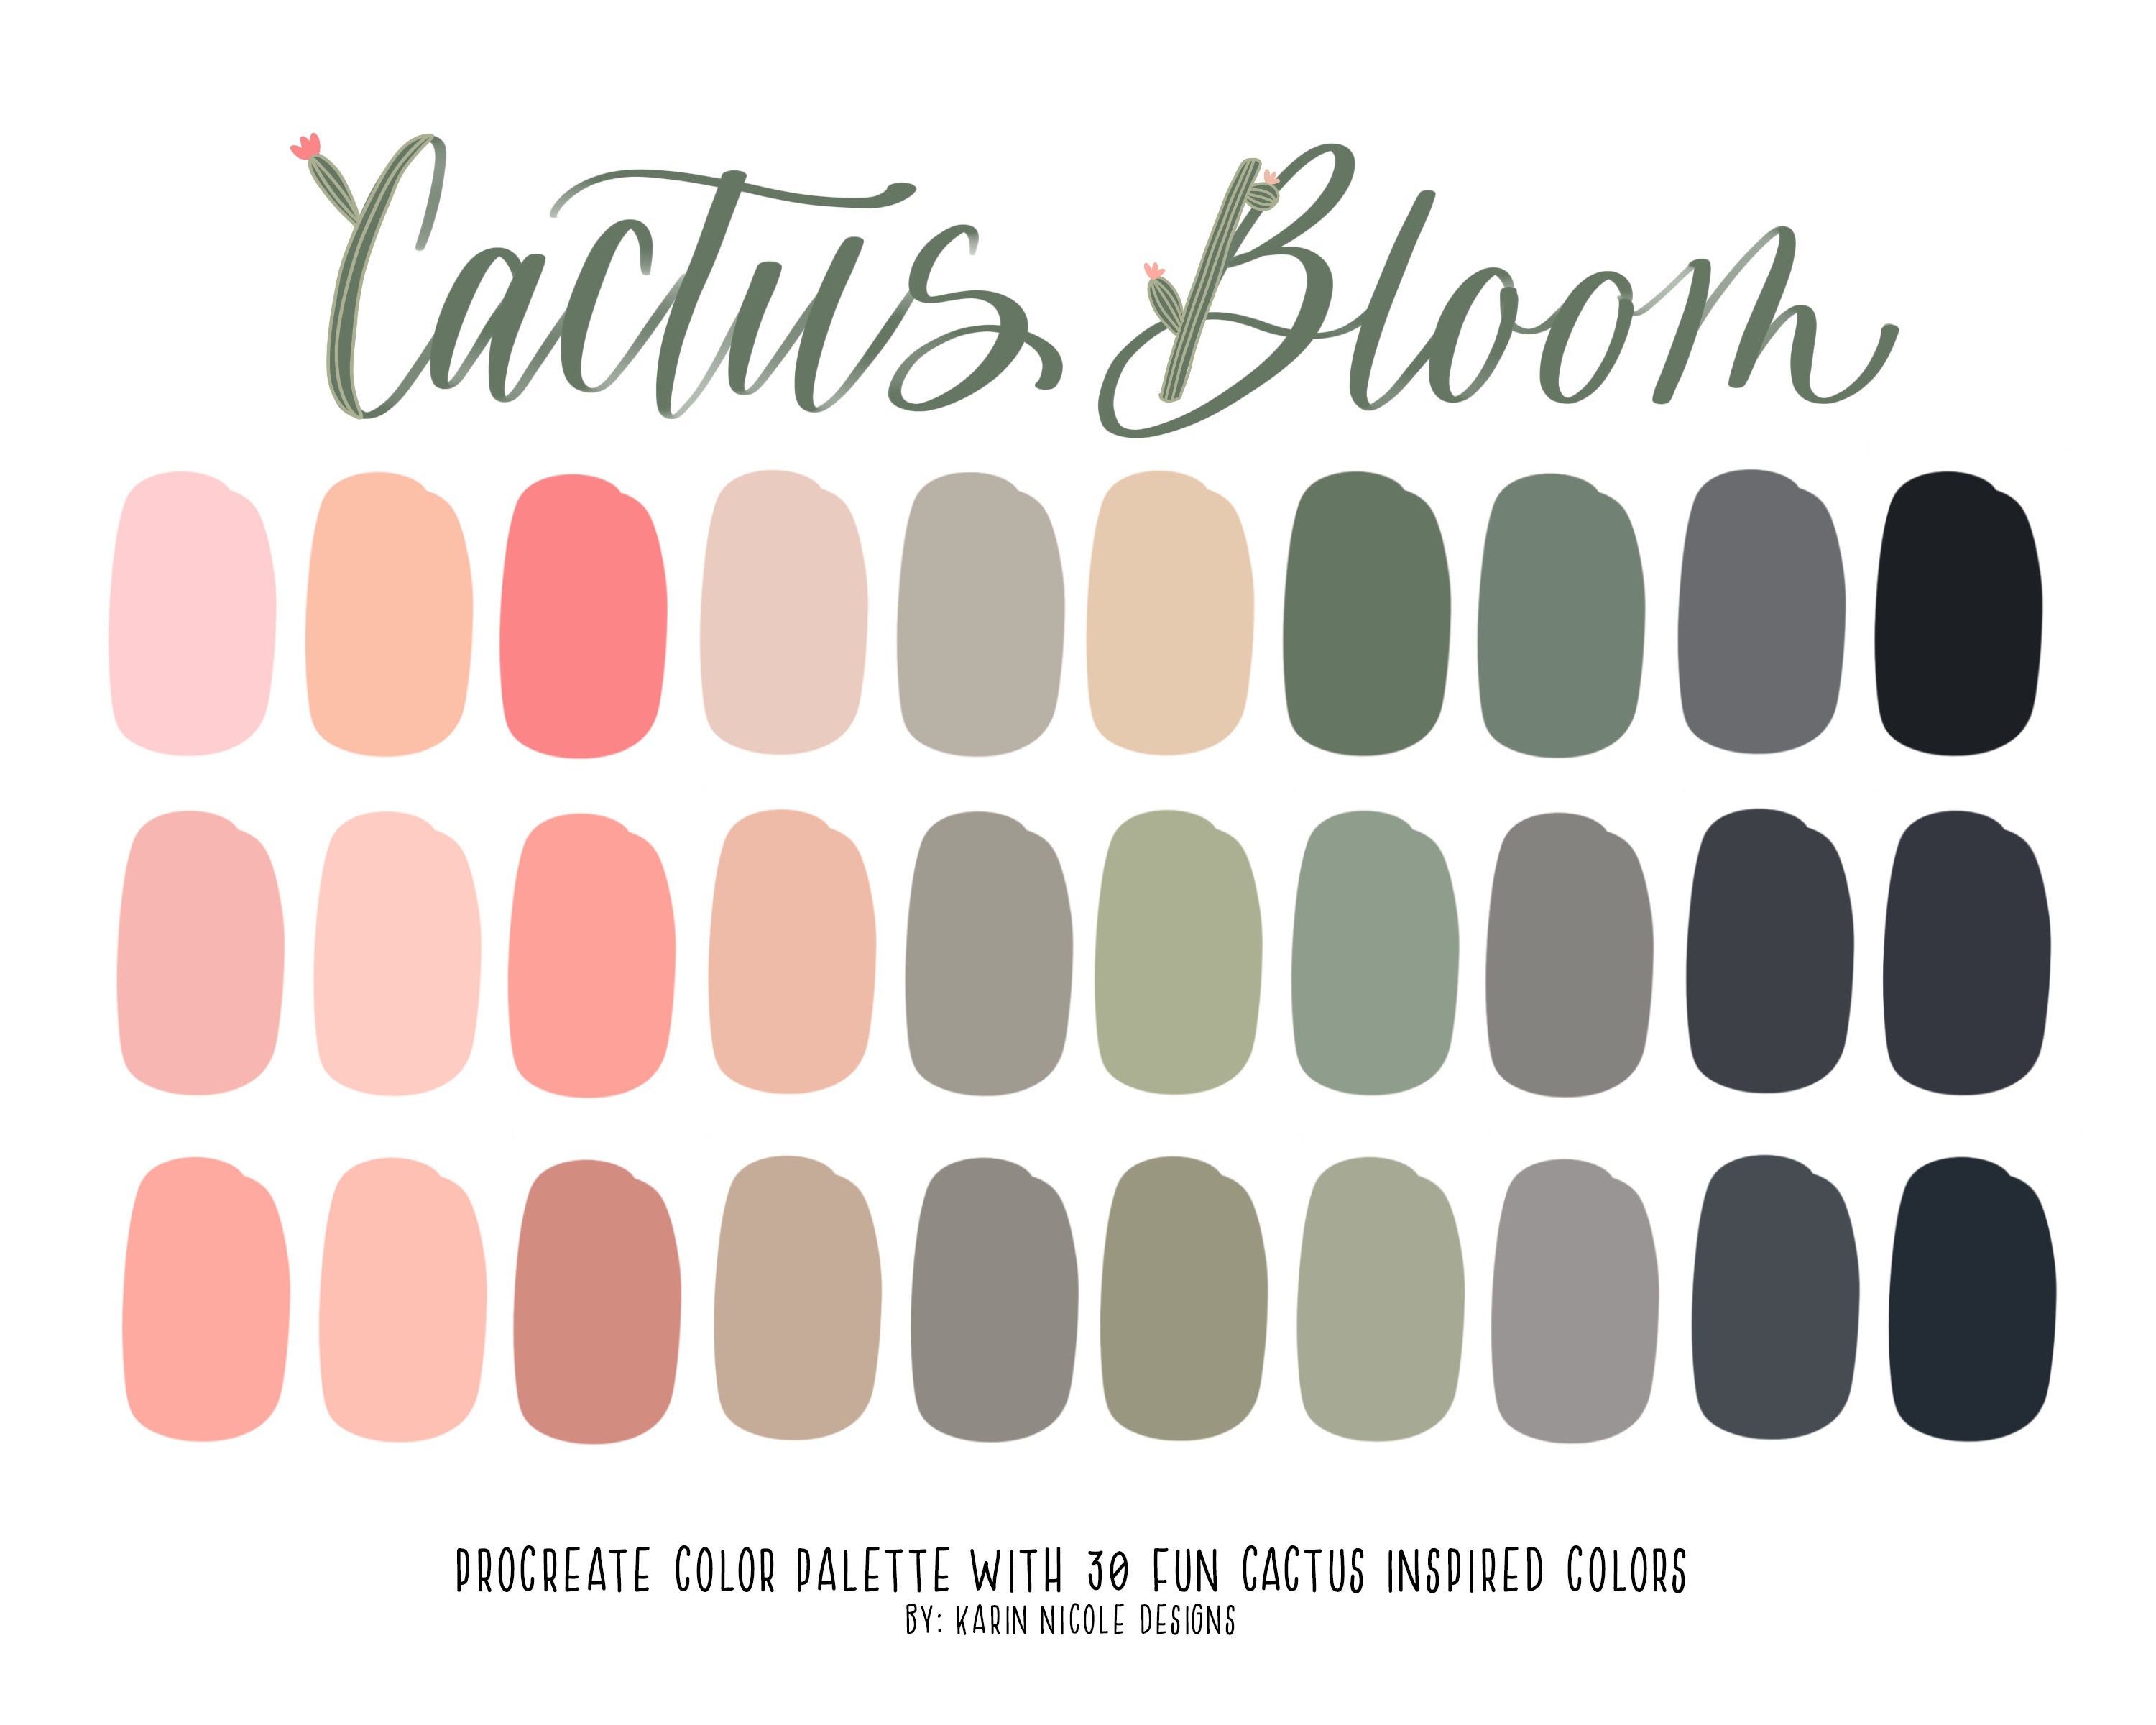 Cactus Bloom Procreate Palette Pink Gray and Green Swatches - Etsy